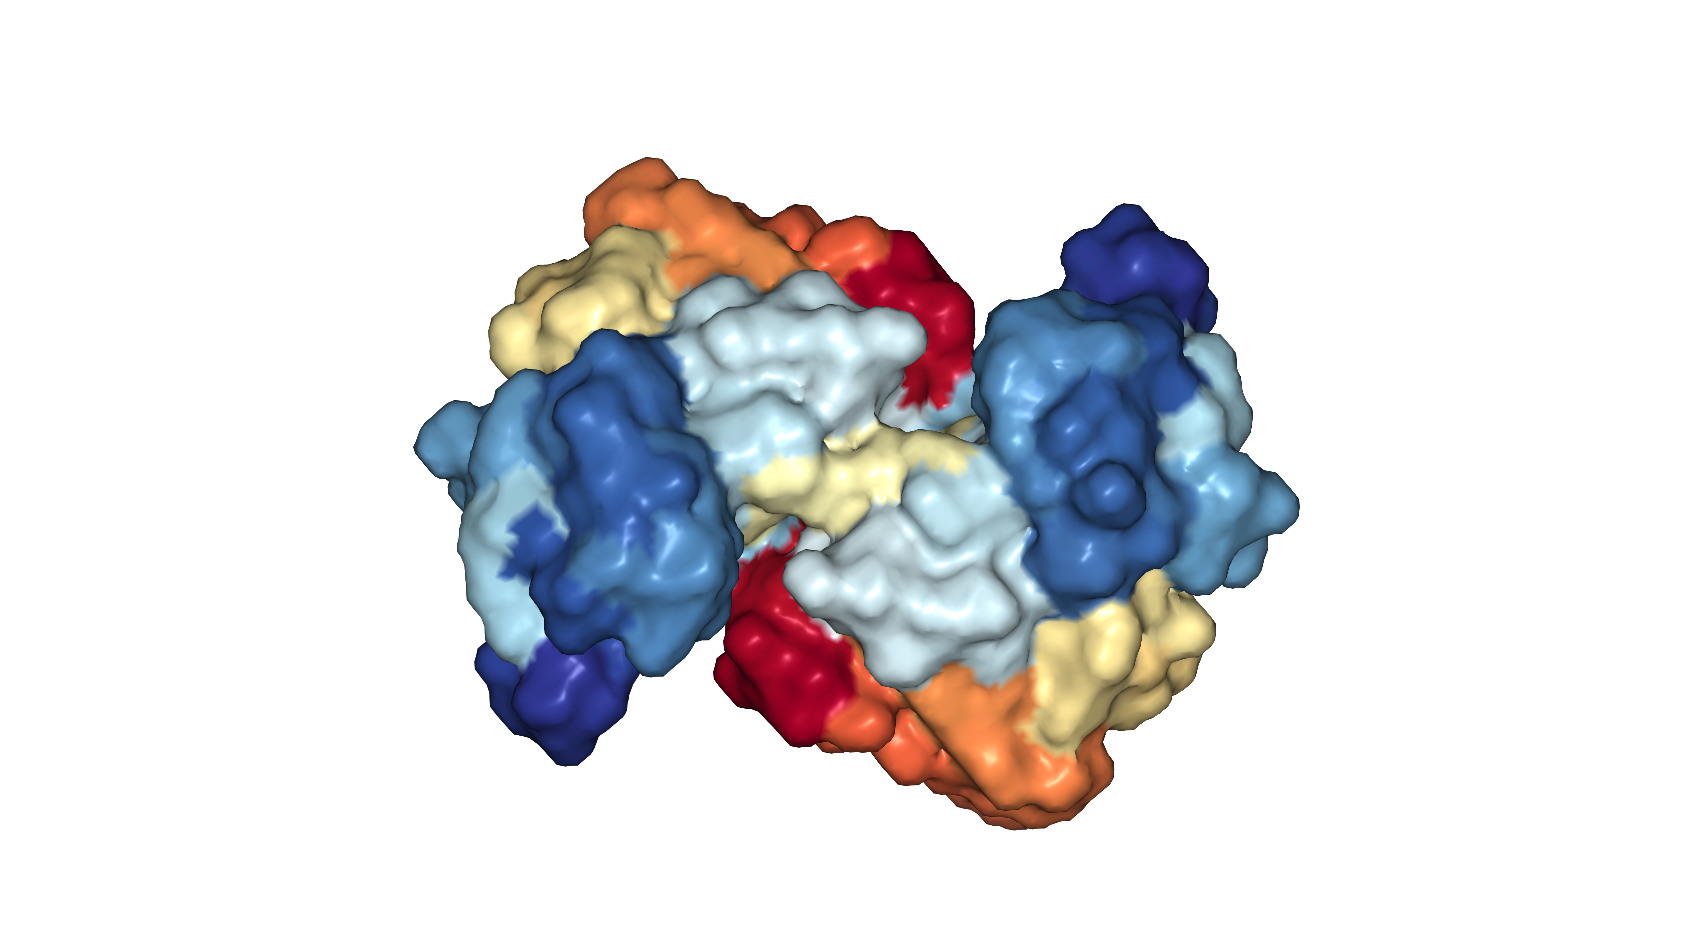 A surface view of the ABL1 protein, showing the pockets and irregularities that a drug could target.